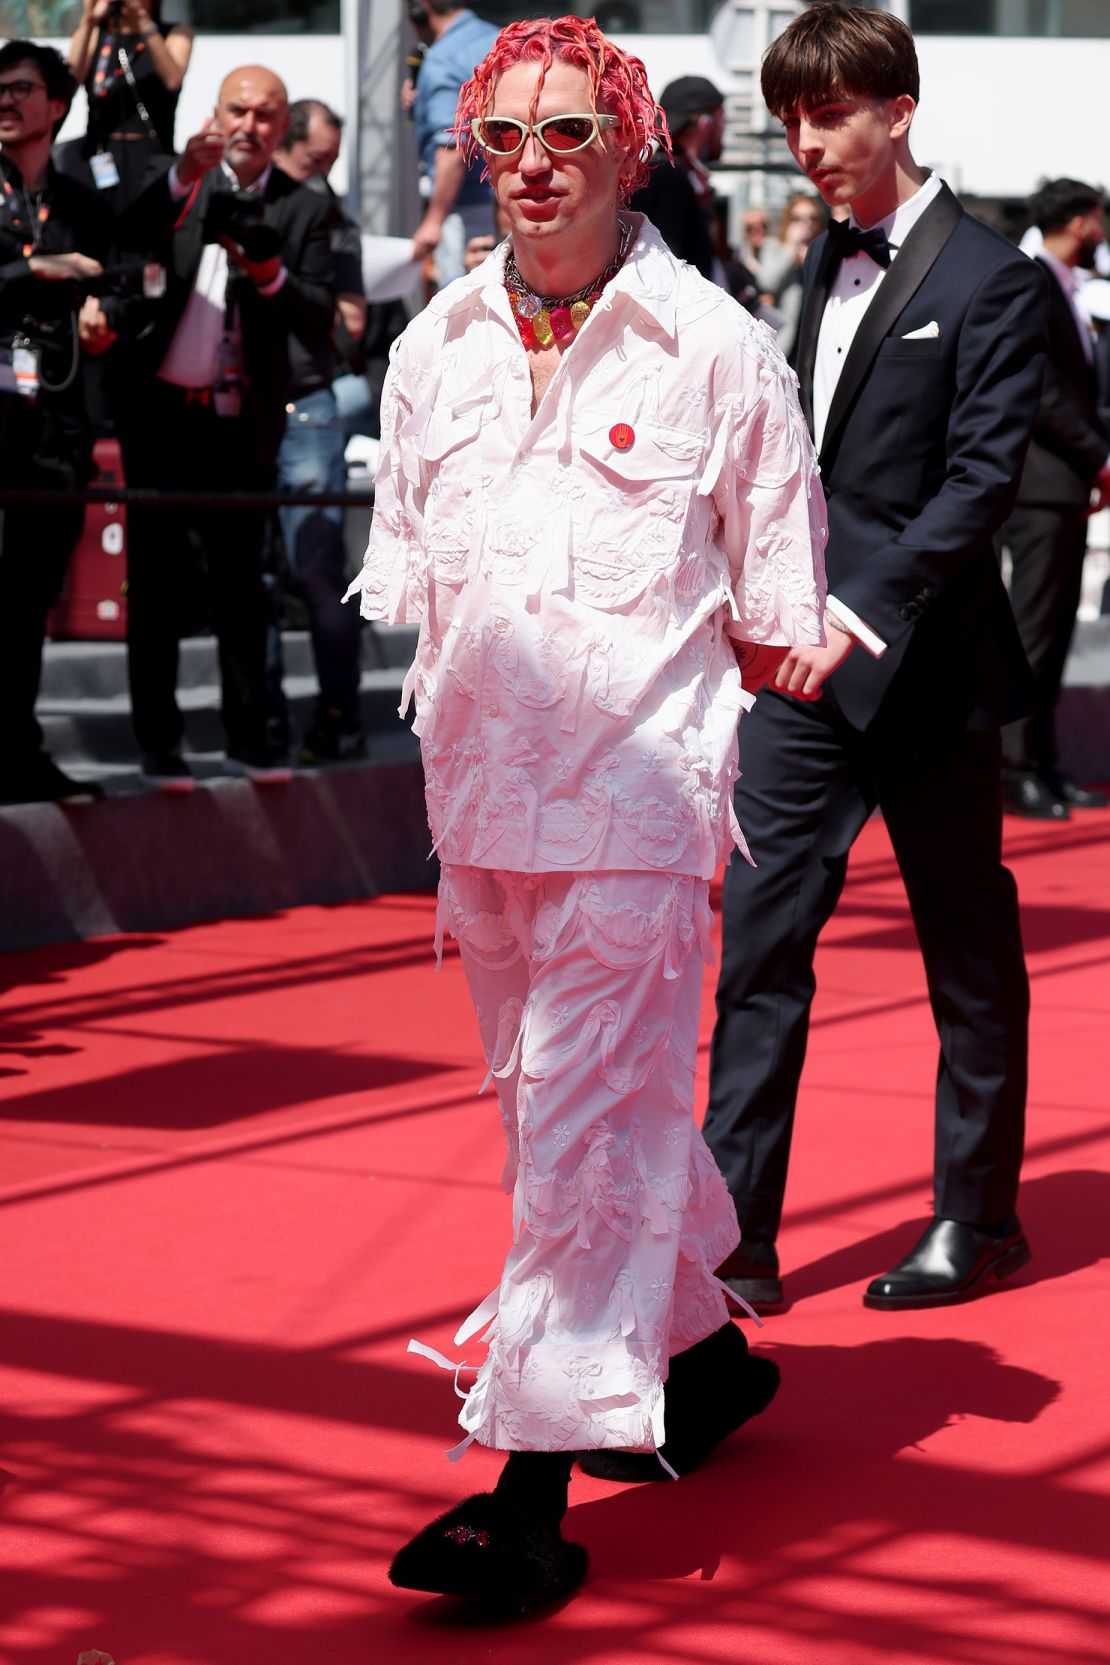 Carlos O'Connell wearing Simone Rocha on May 16.